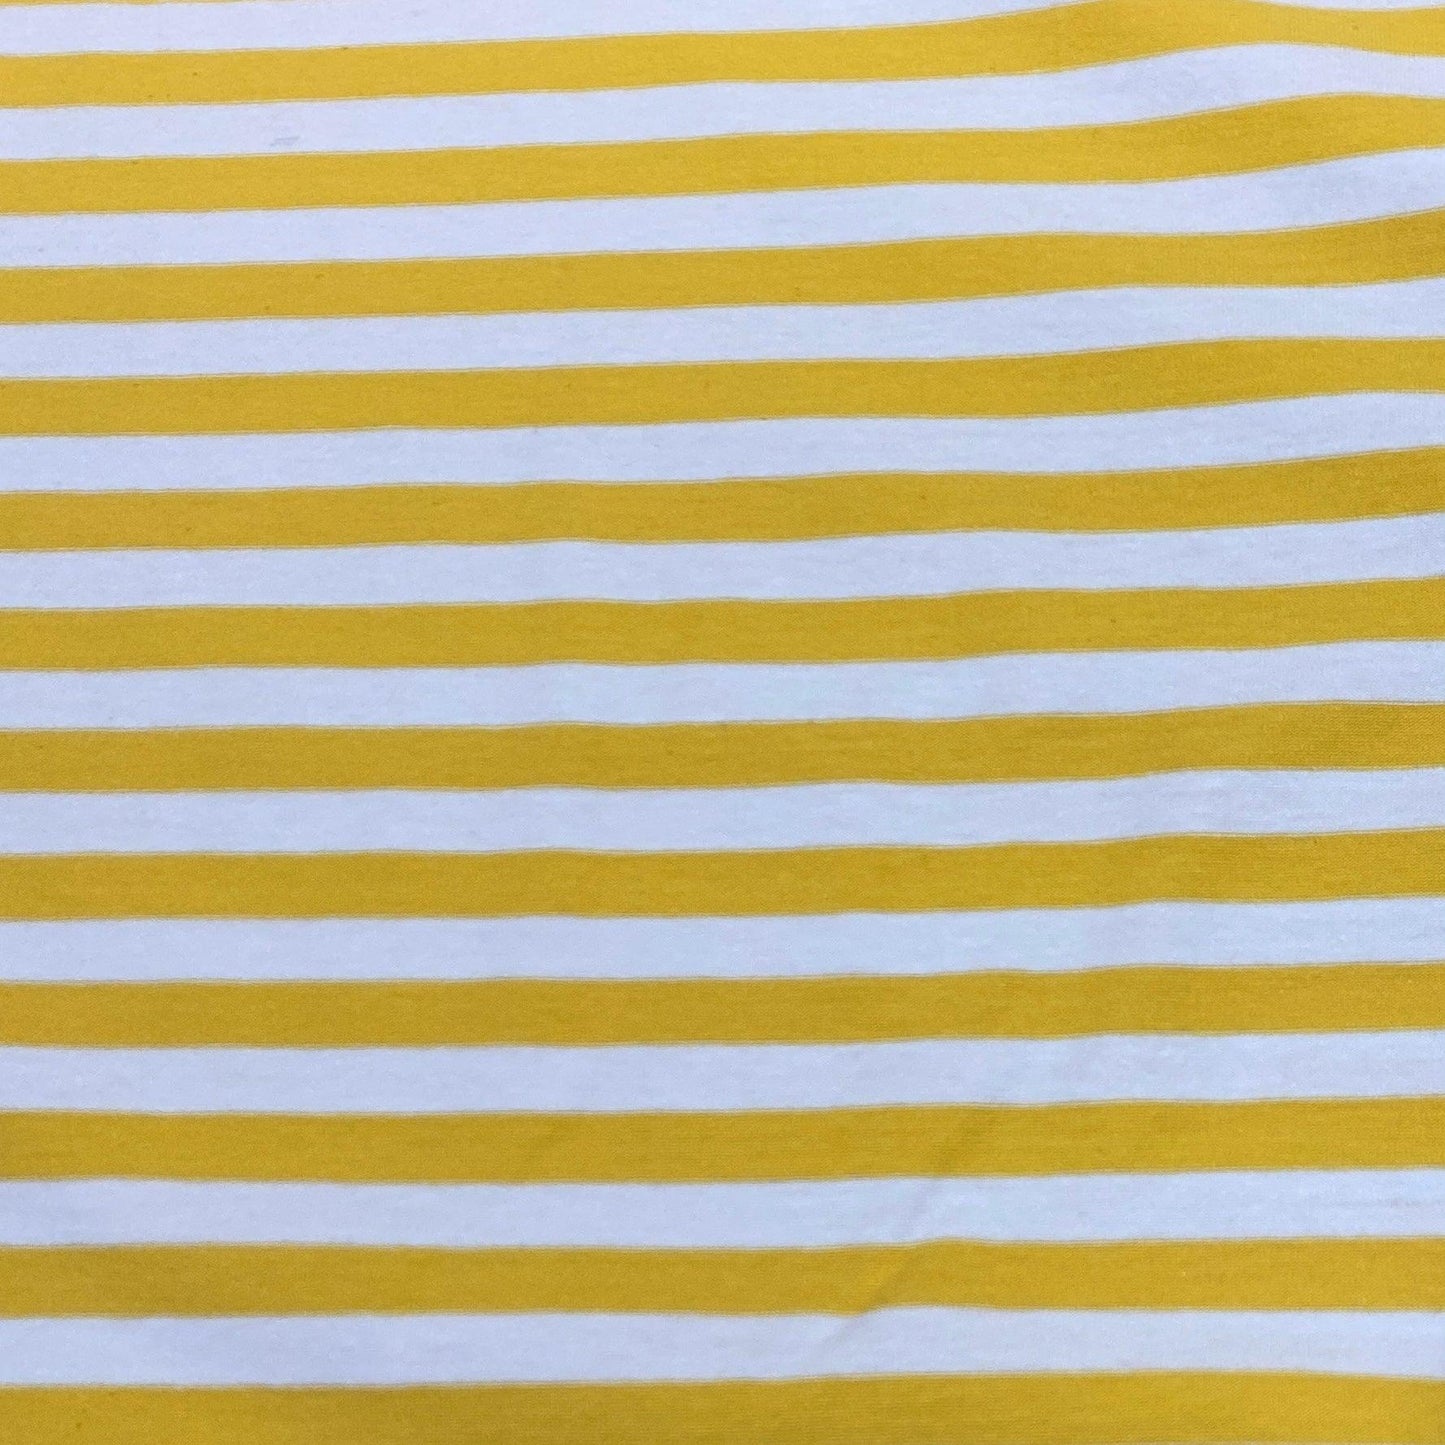 Yellow and White 3/8" Stripes on Cotton/Spandex Jersey Fabric - Nature's Fabrics